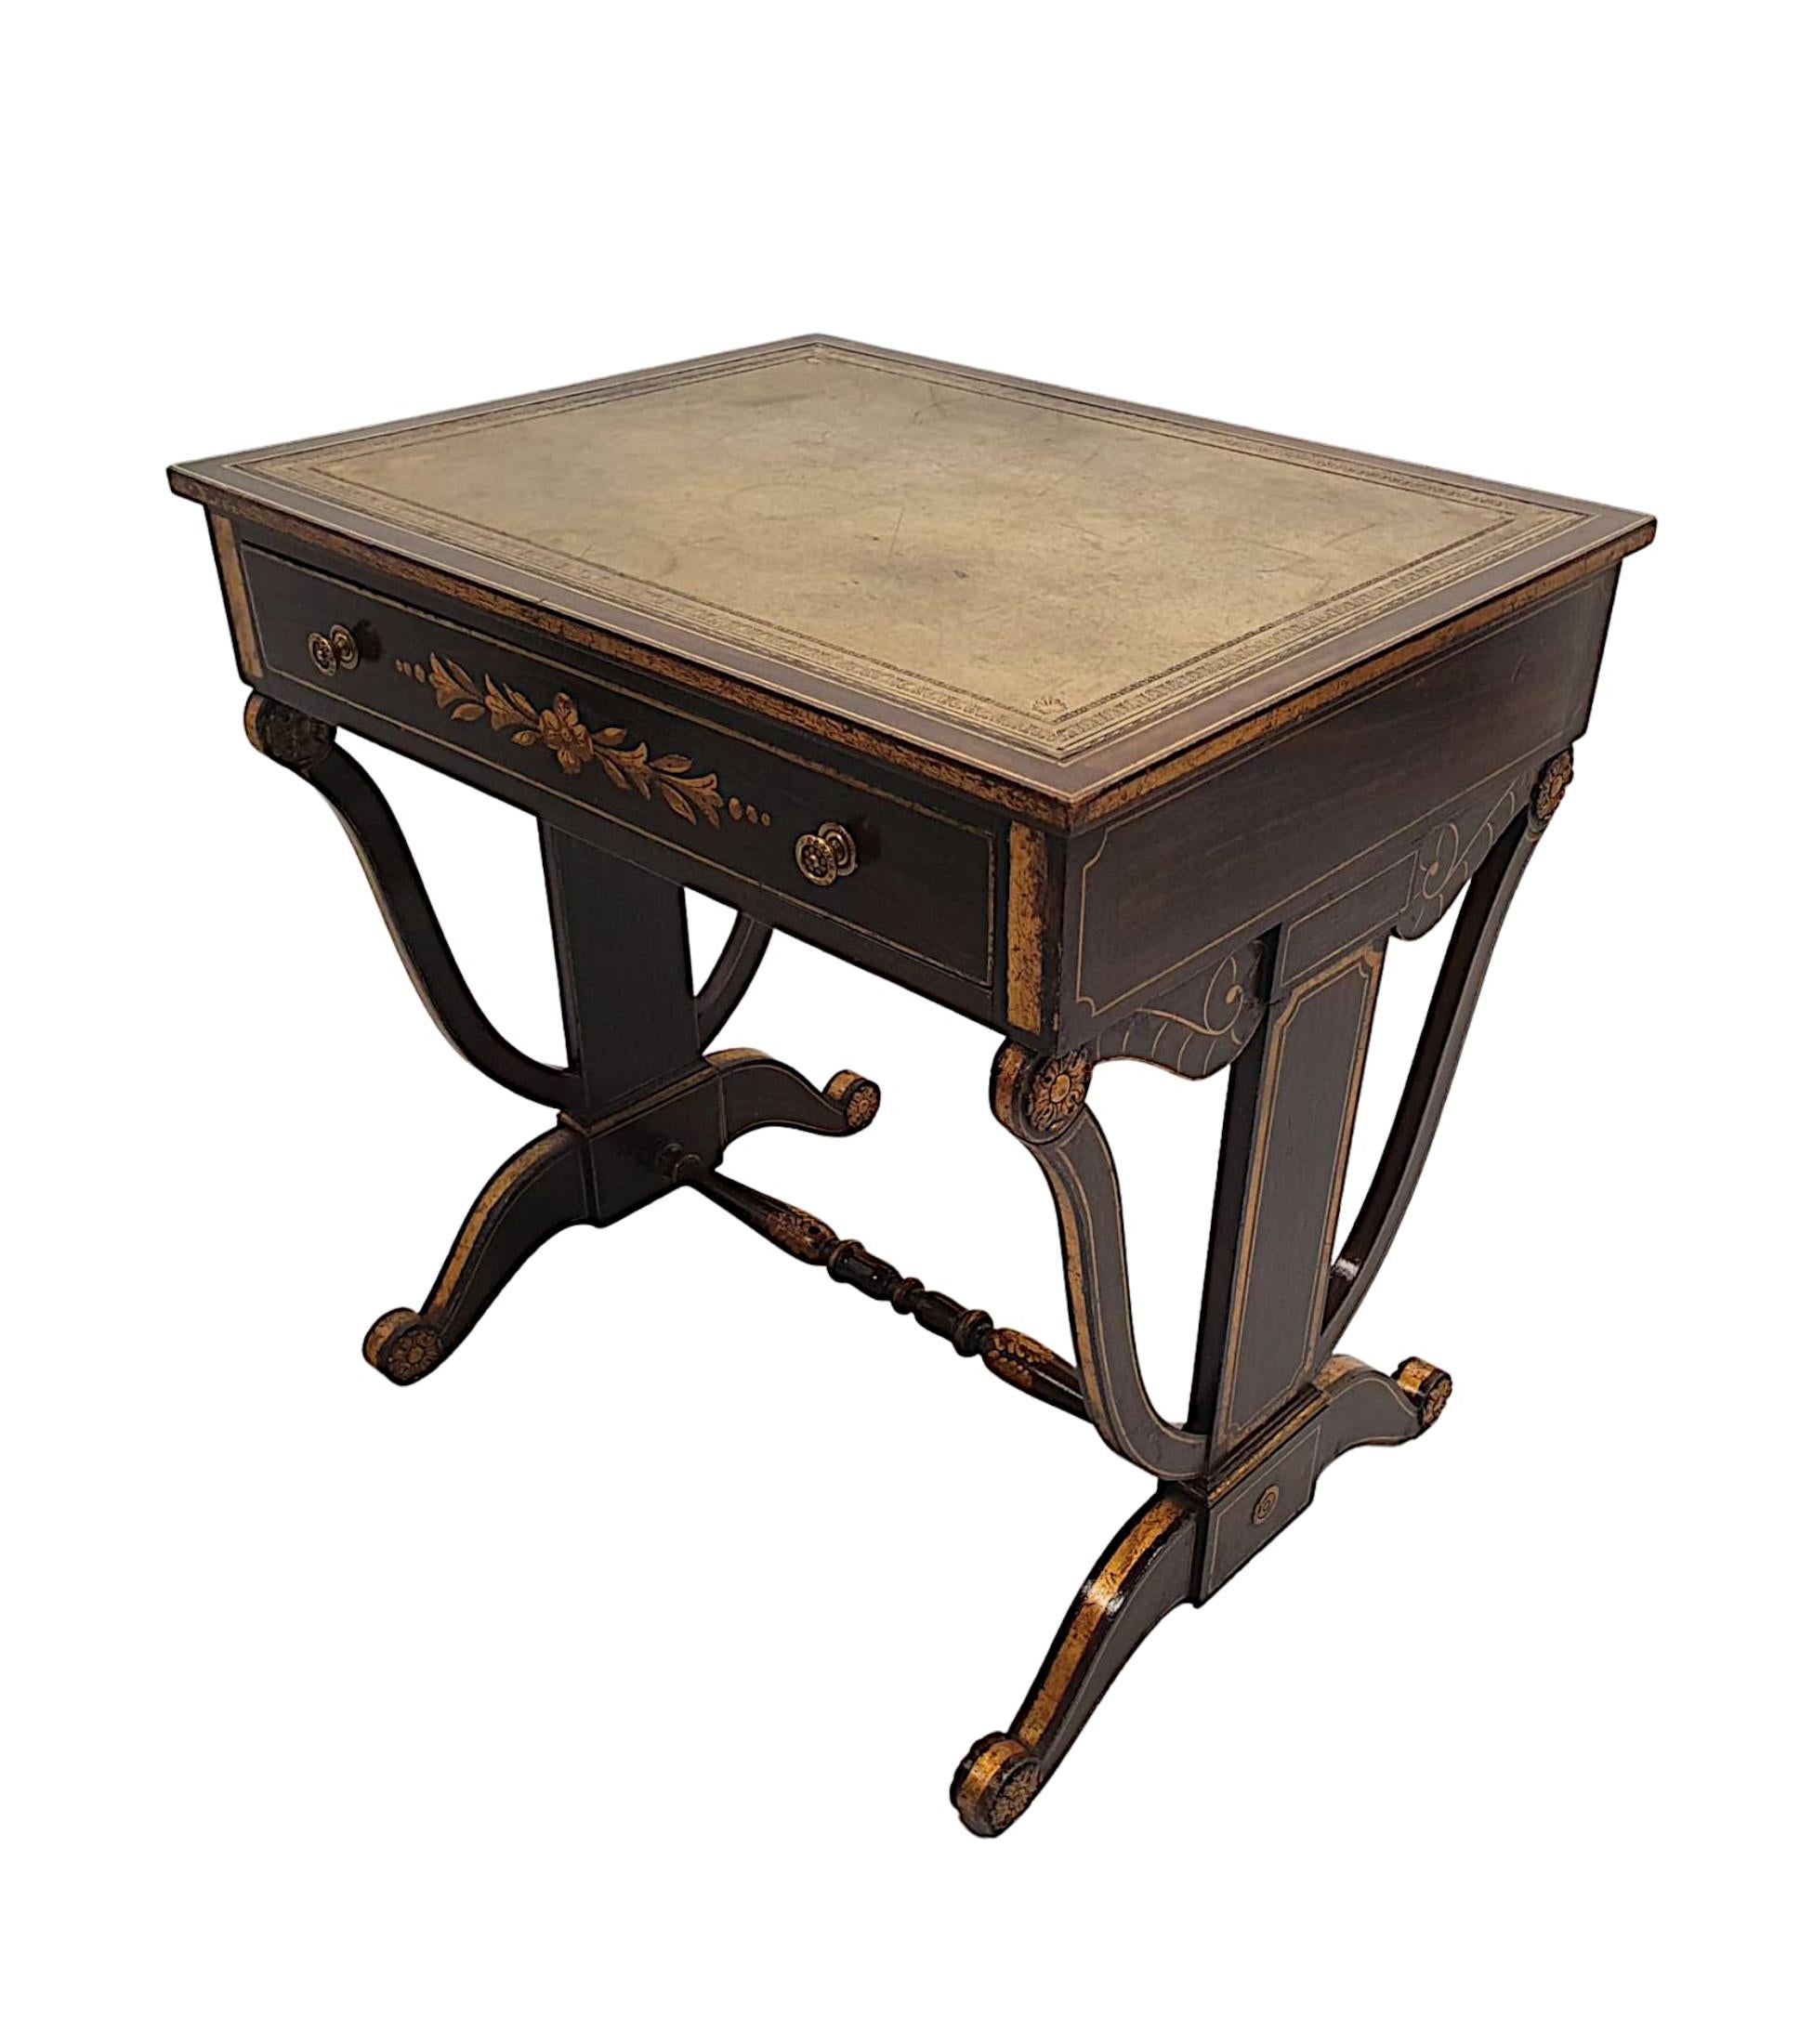 A very fine and rare early 19th century American Baltimore Federal painted writing table with fabulous parcel gilt detail throughout. The moulded top of rectangular form is fitted with a gorgeous green embossed tooled leather writing skiver surface